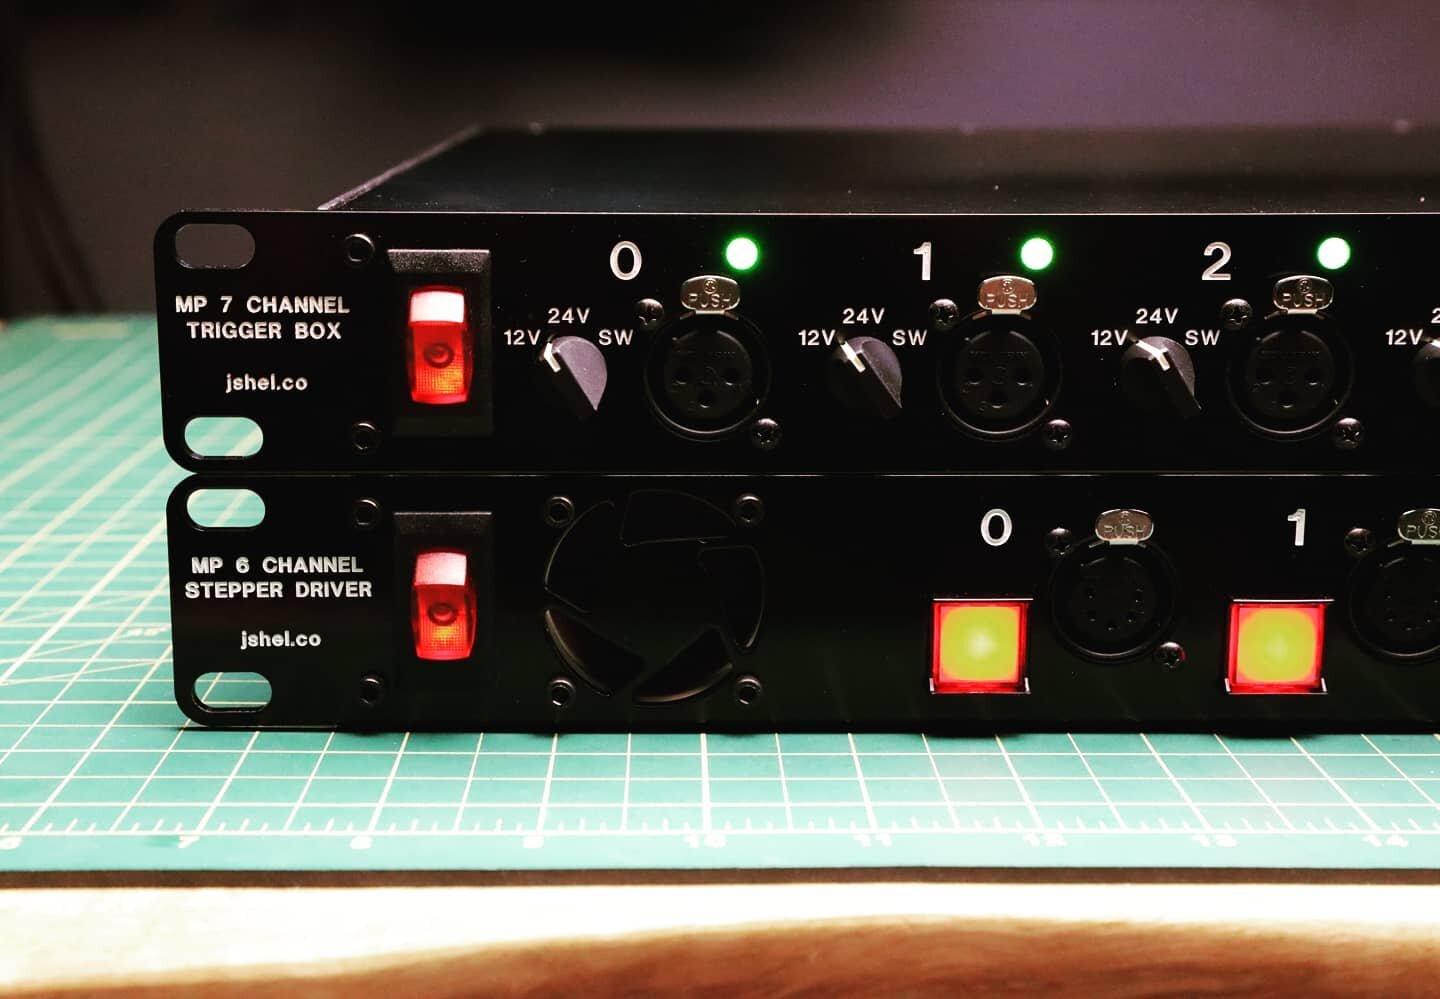 New iteration of the @motorizedprecision control boxes, this pair for @travis_rathbone_studio. Main differences:
- Front panel is a PCB, which reduces the amount subassemblies drastically reduced the number of assembly operations, which makes putting